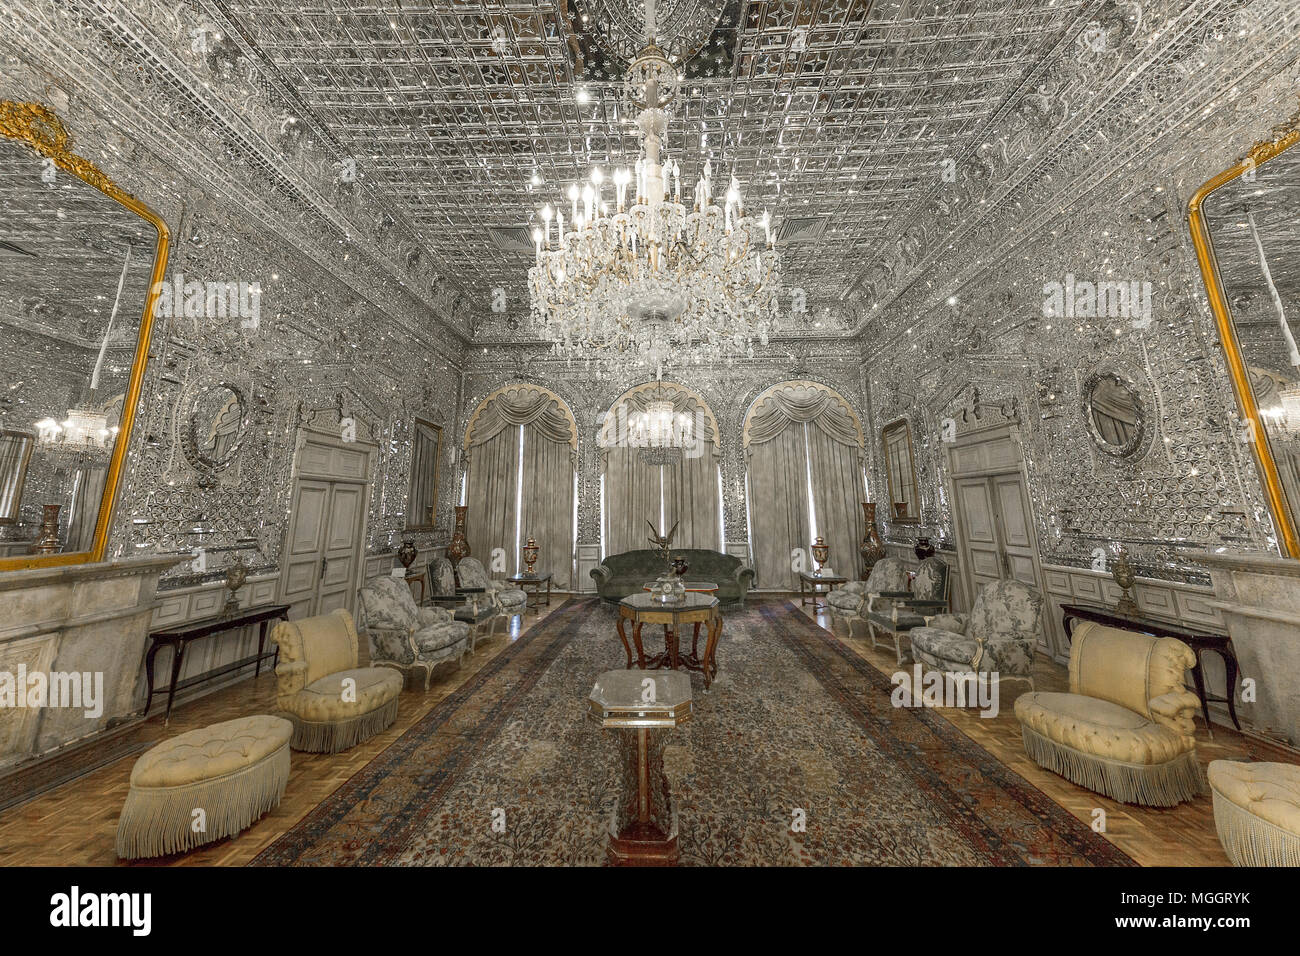 Scenic mirror hall in the Golestan Palace in Tehran, Iran. The walls and the ceiling of the hall are decorated with pieces of mirrors and glass. Stock Photo